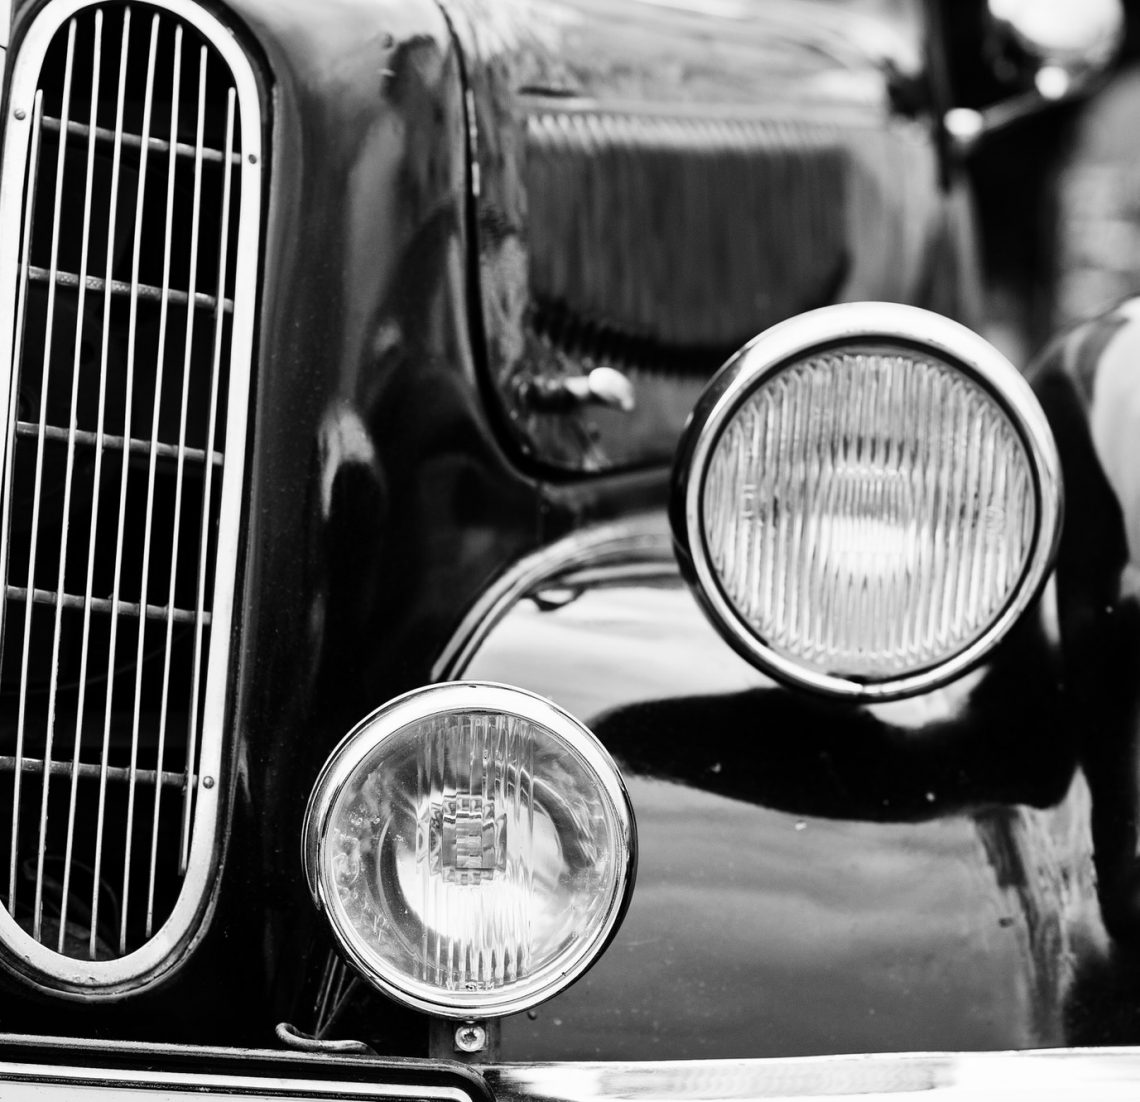 Retro car headlight. Front of old vintage car